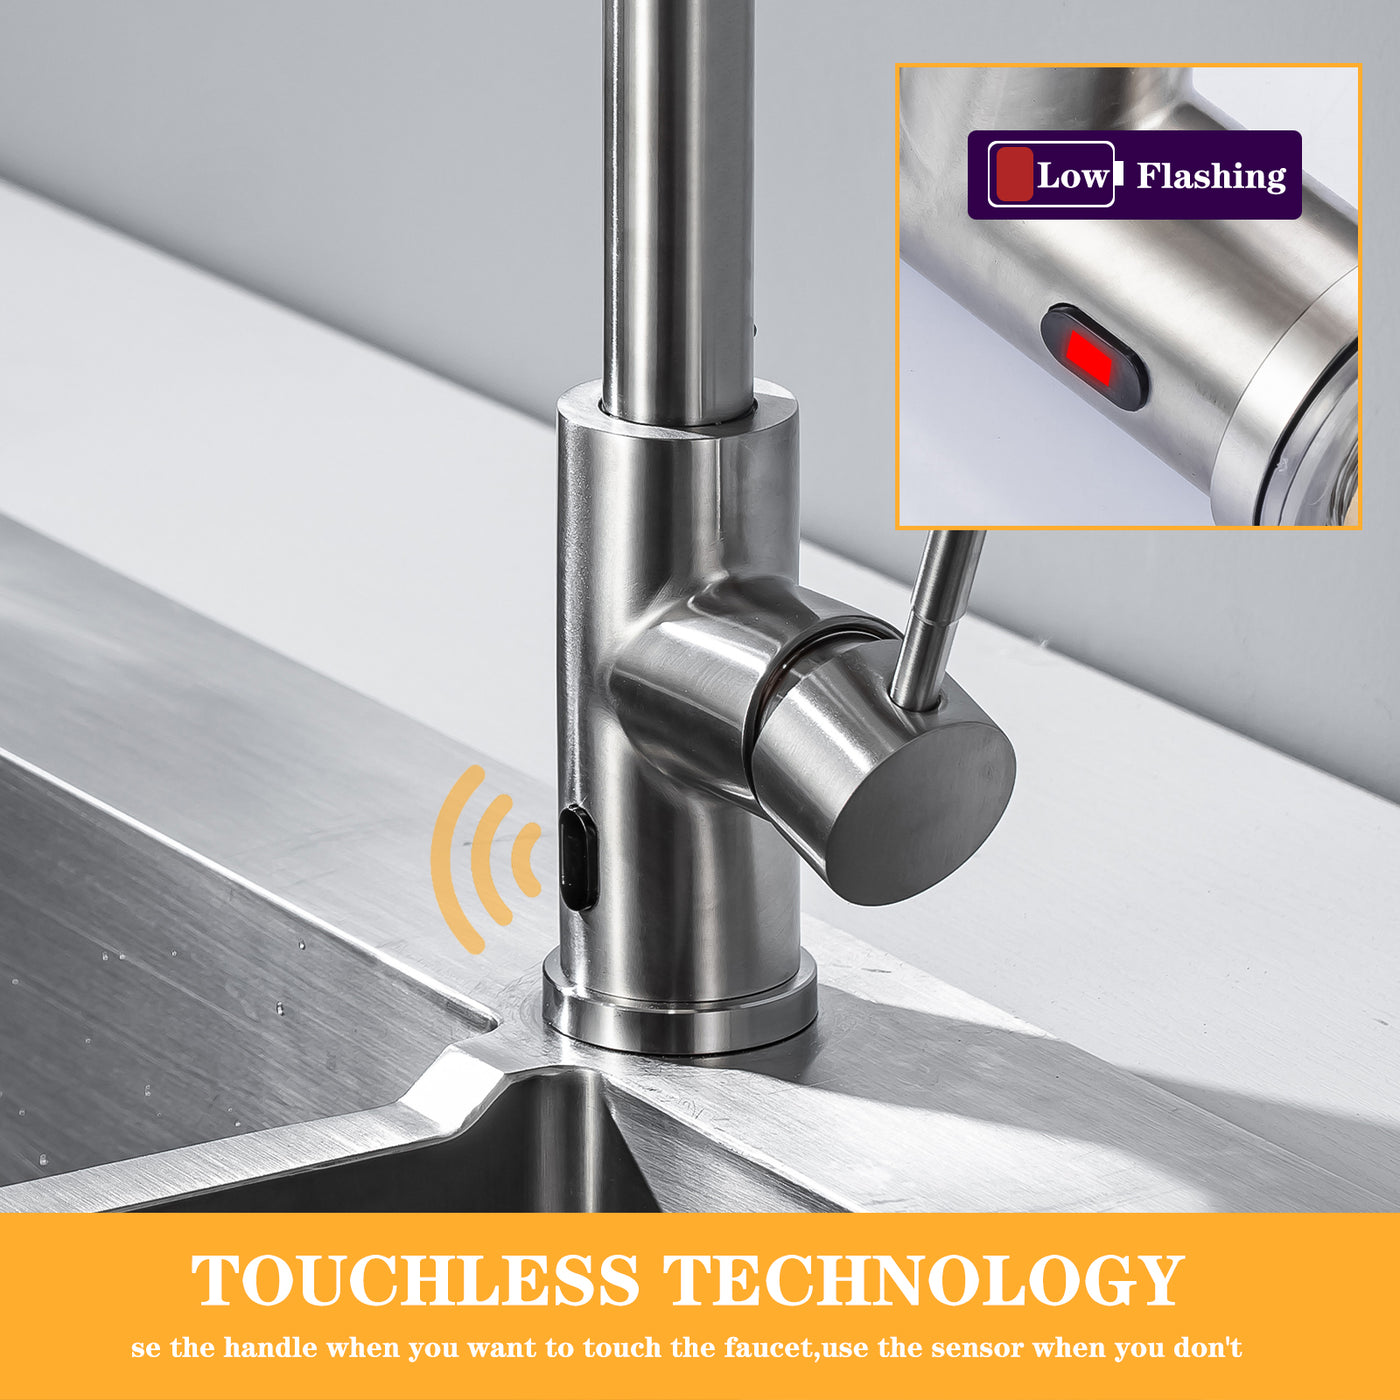 Smart Touchless Kitchen Faucet Water Filter